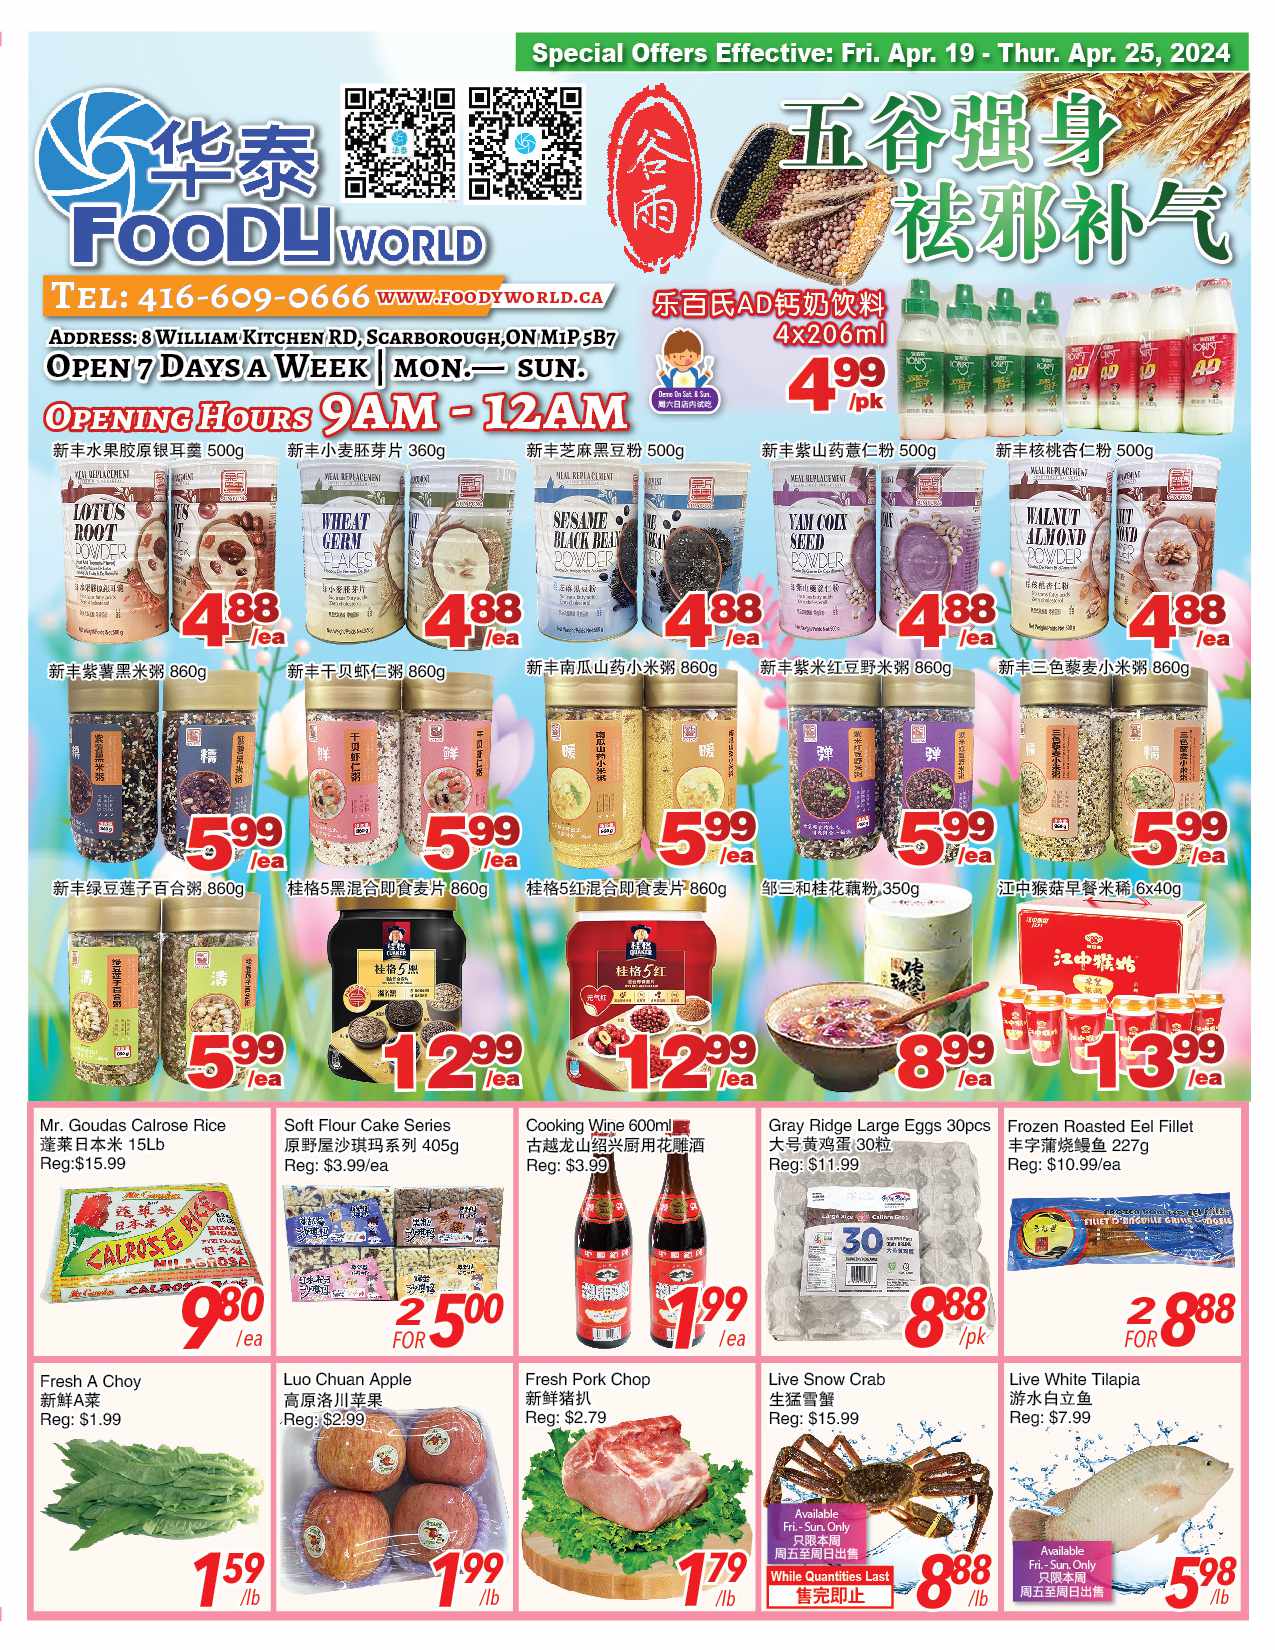 Foody World - Weekly Flyer Specials